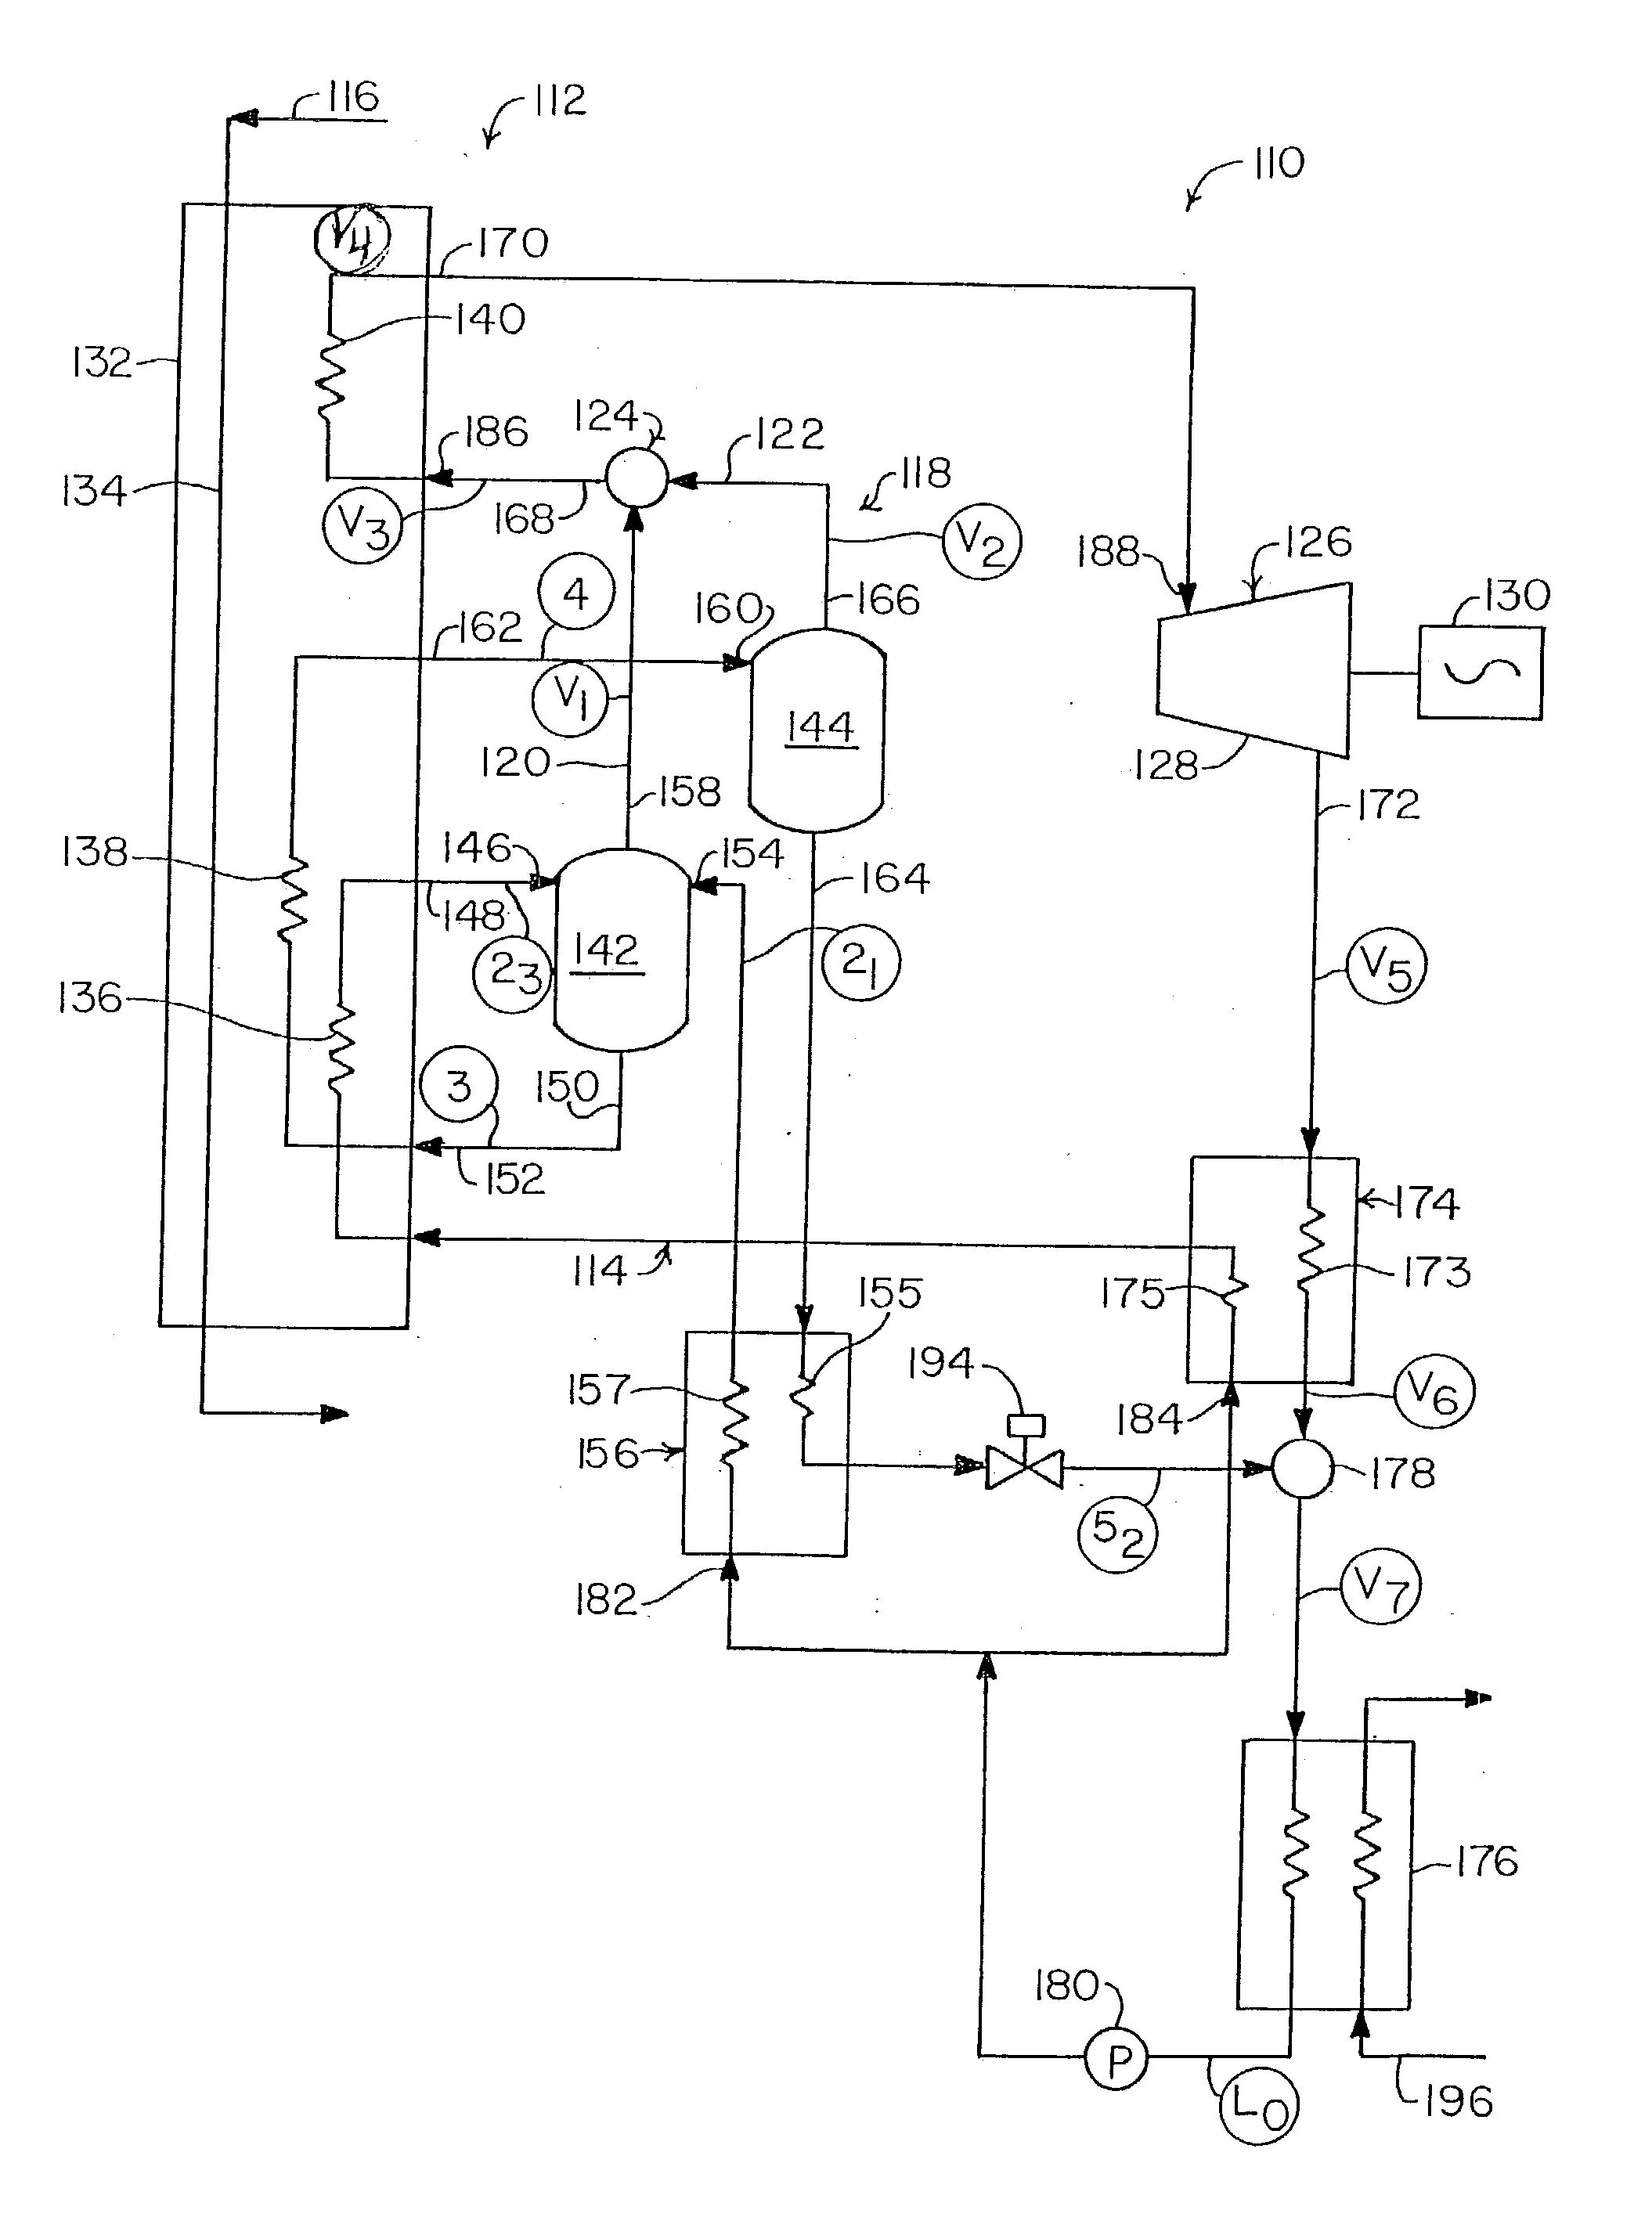 Mixed working fluid power system with incremental vapor generation